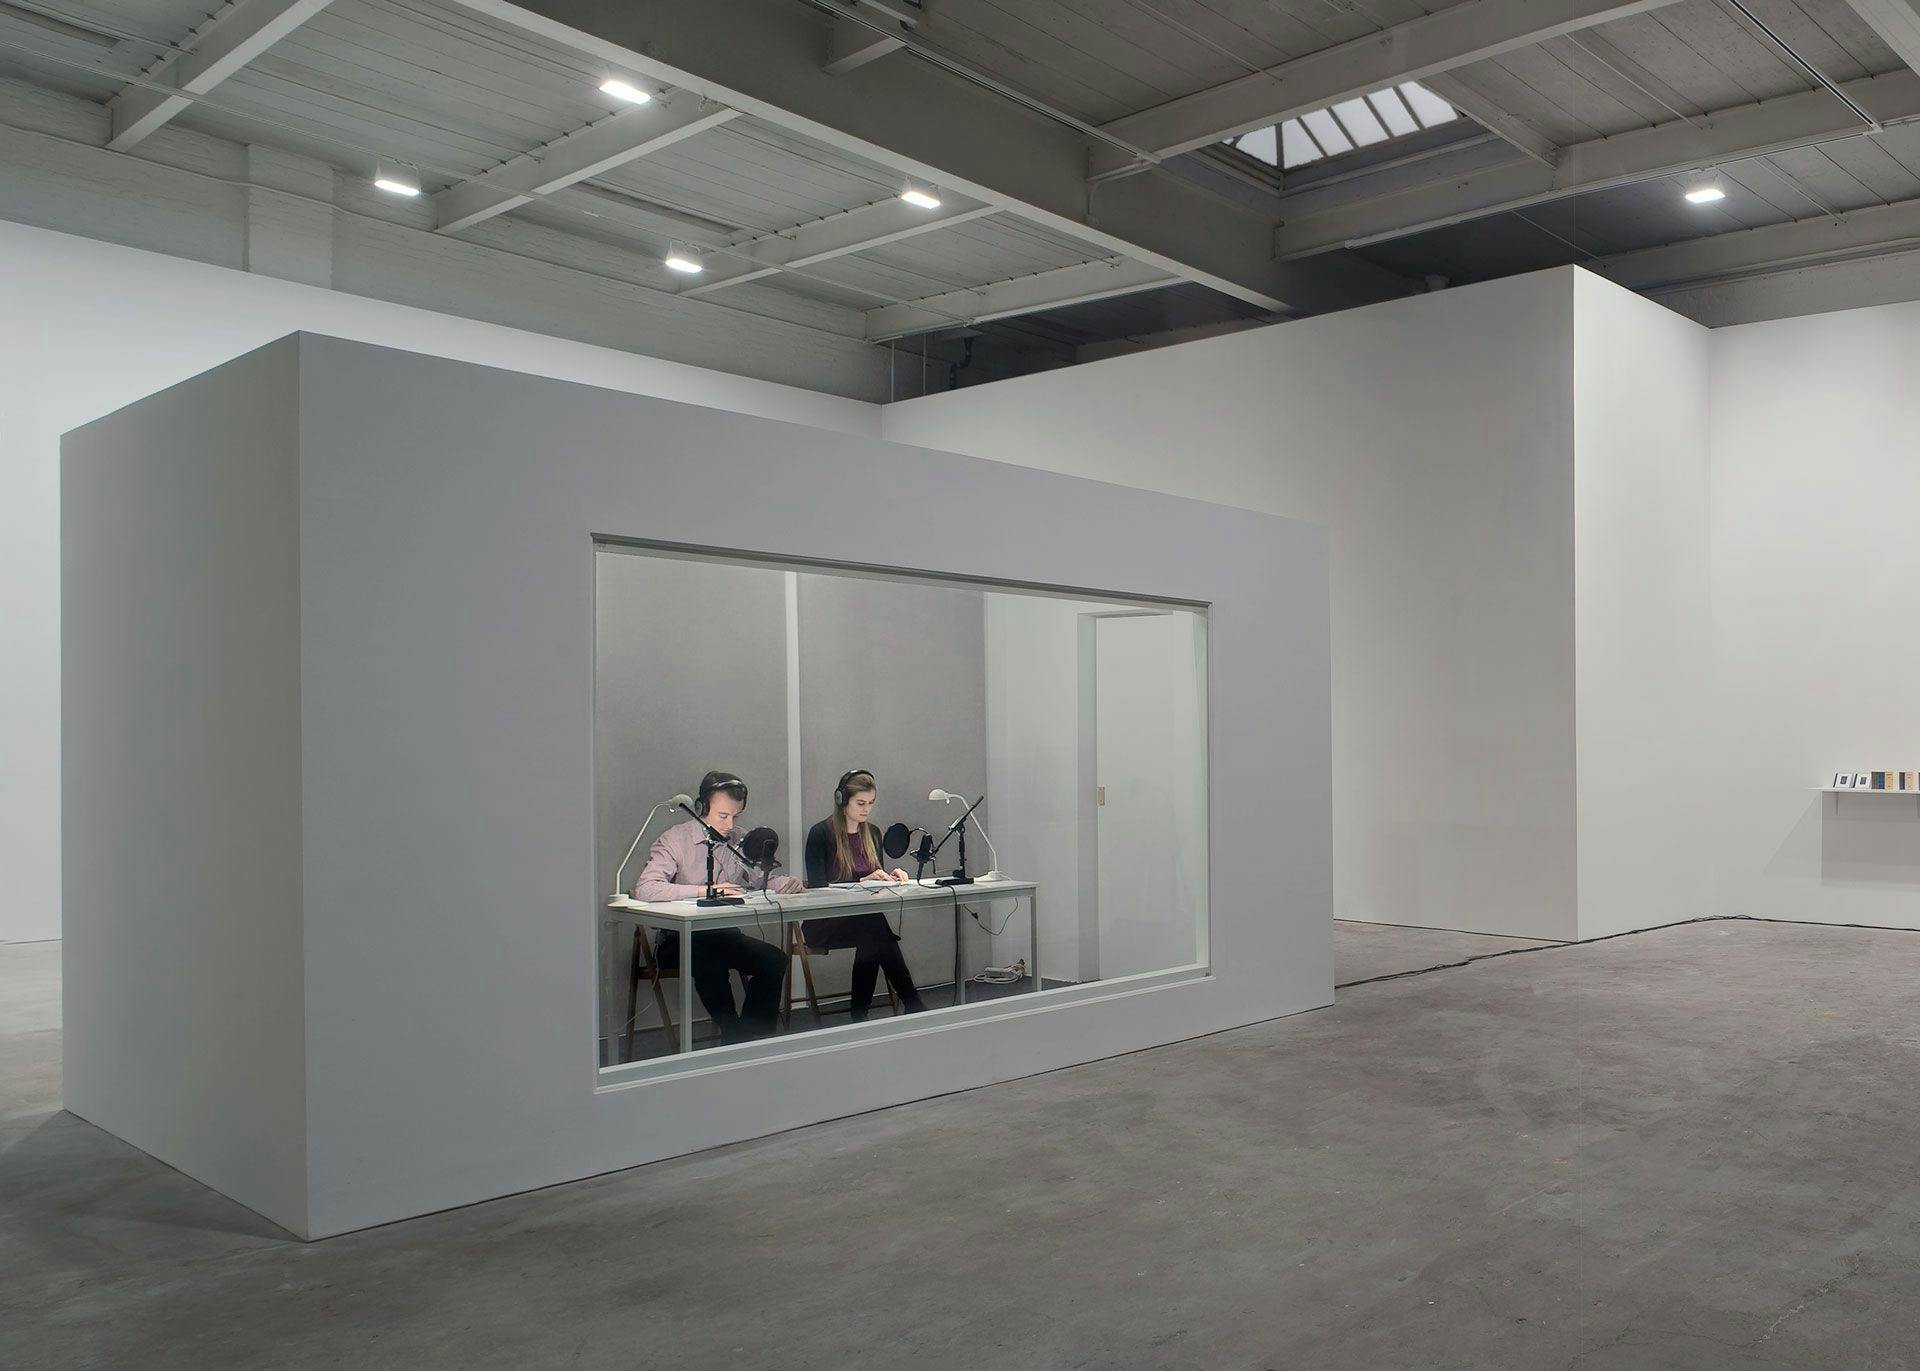 Installation view of On Kawara: One Million Years, at David Zwirner in New York, dated 2009